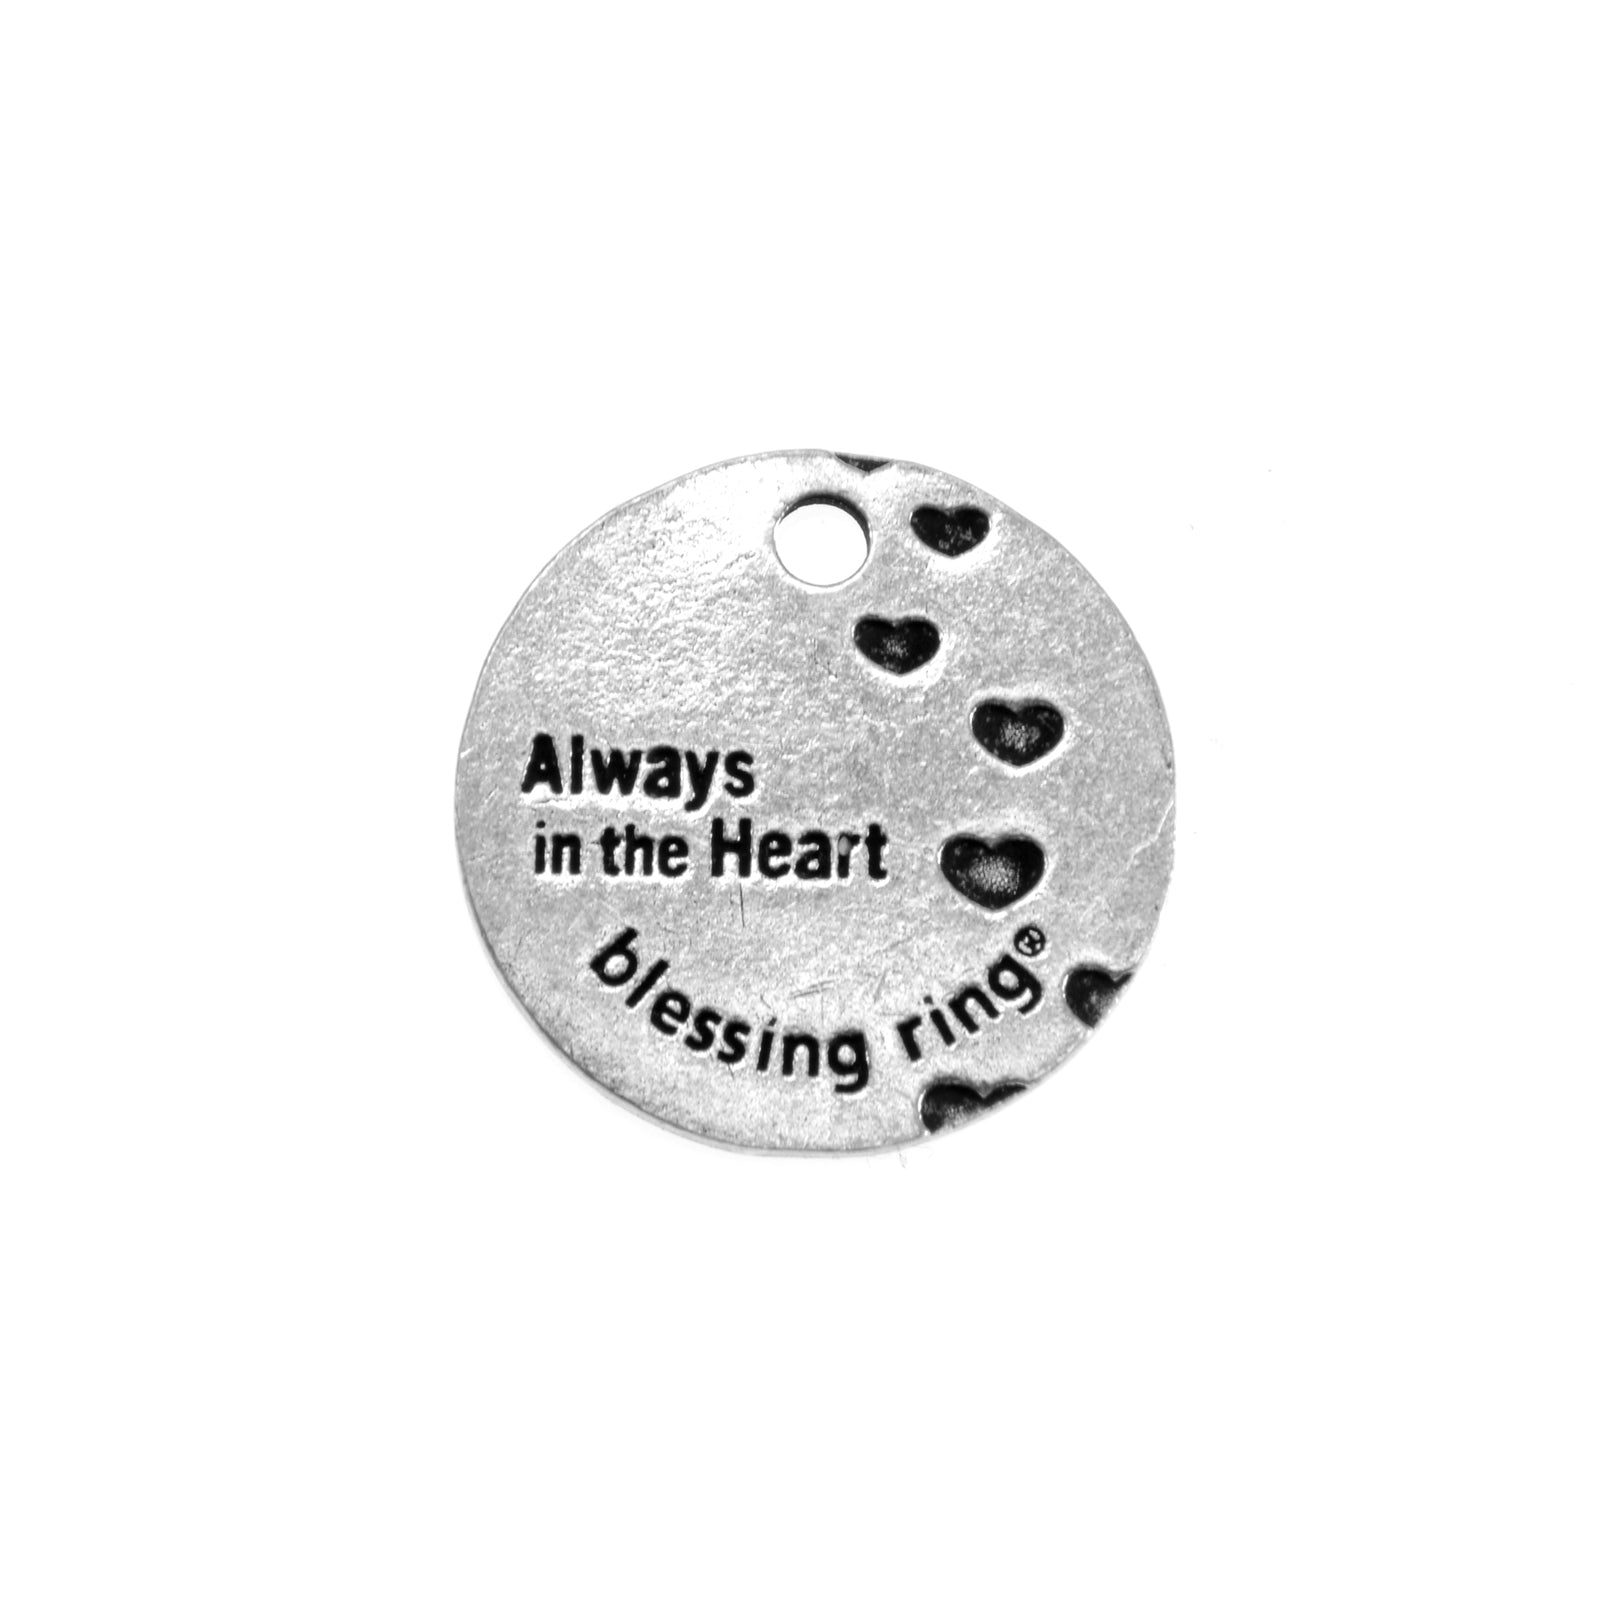 Love Blessing Ring Bracelet Charm Gift with meaning Always in my